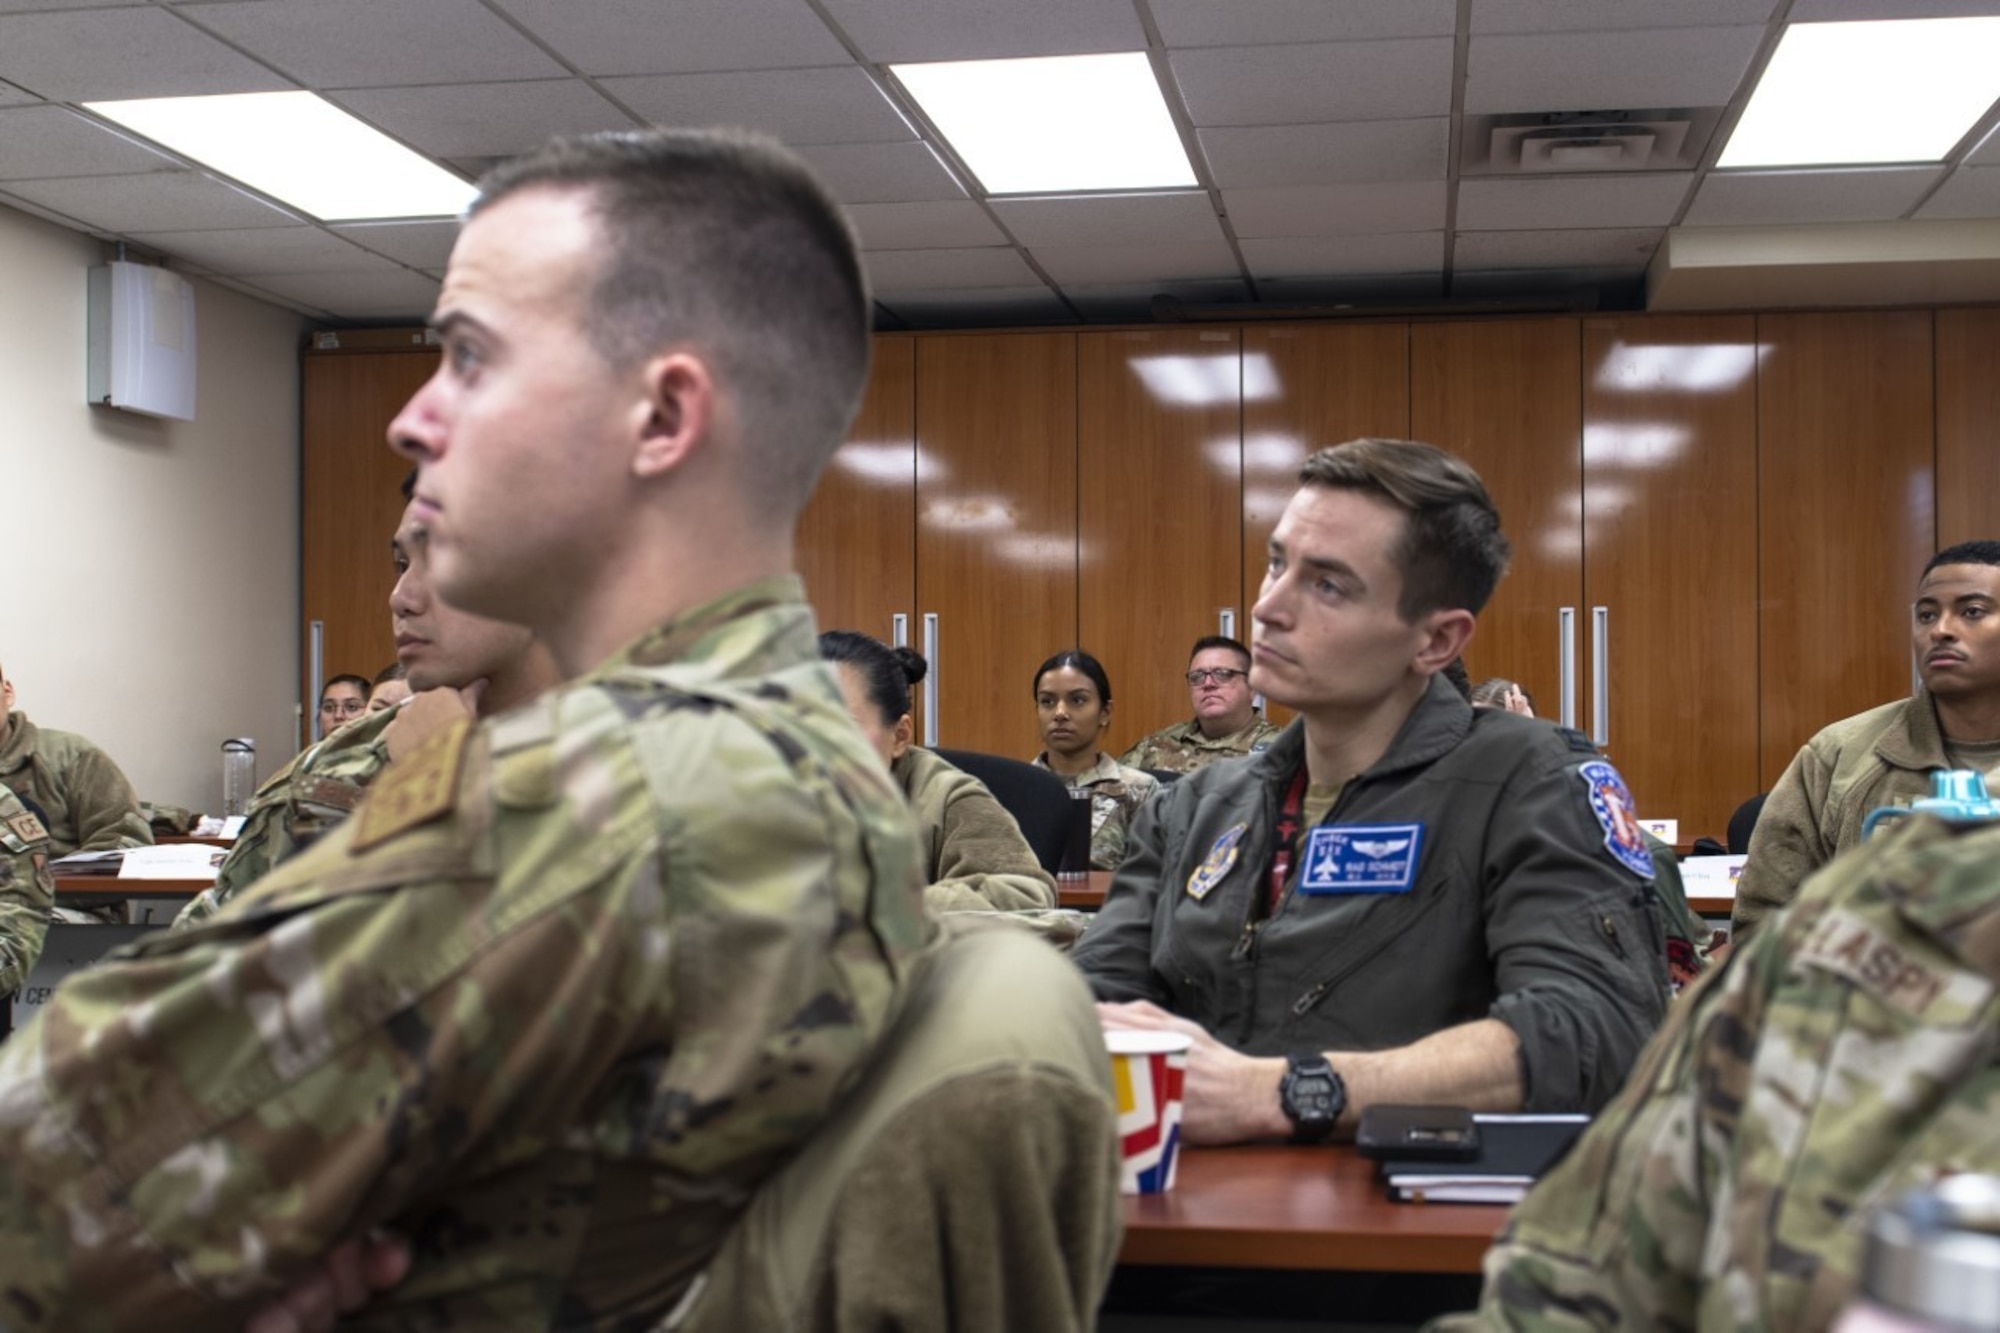 Students focus on a lesson during a Flight Commander Leadership Course at Osan Air Base, Republic of Korea, Dec. 7, 2022.